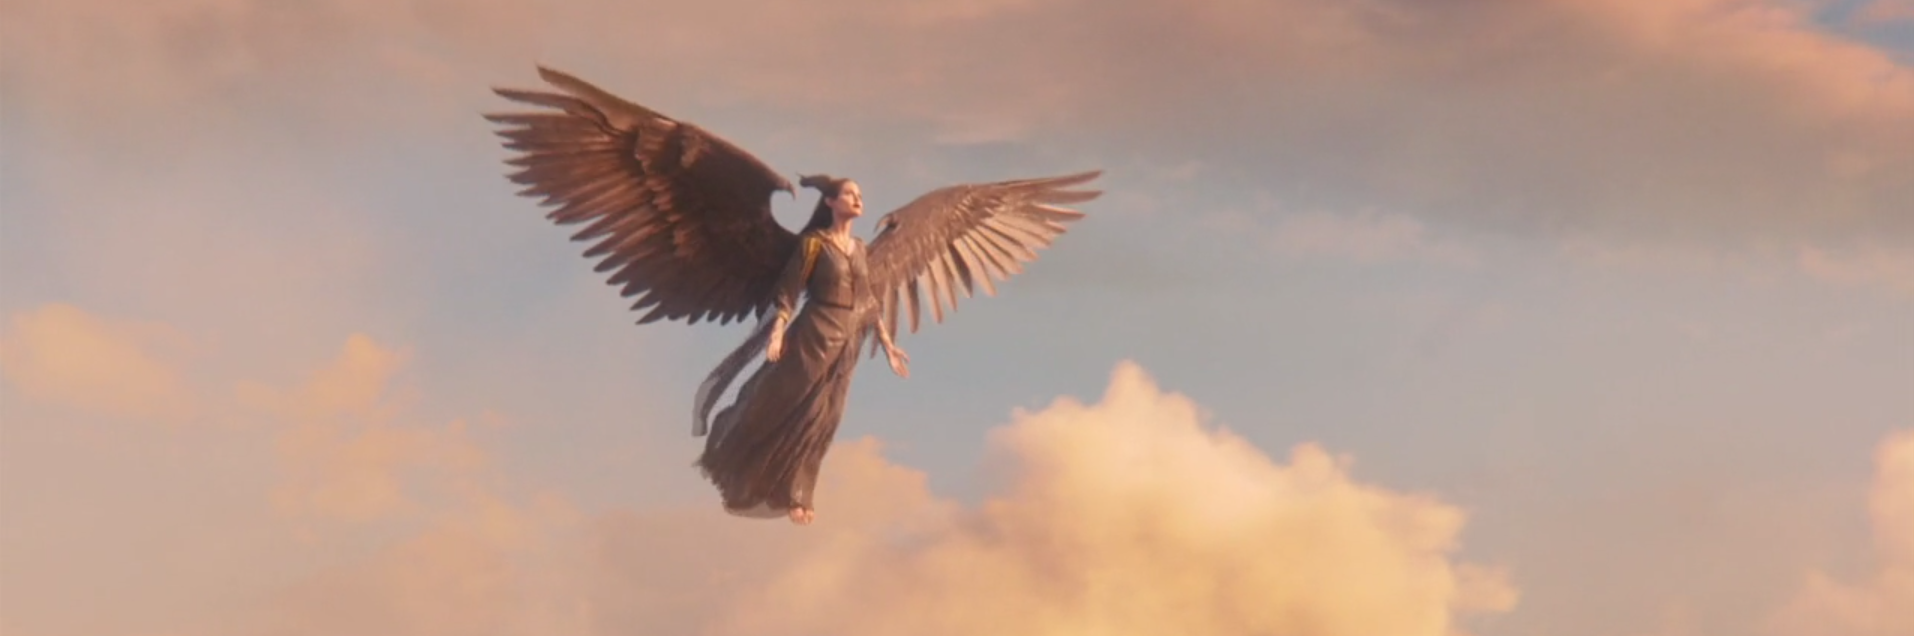 Angelina Jolie as Maleficent flying picture image